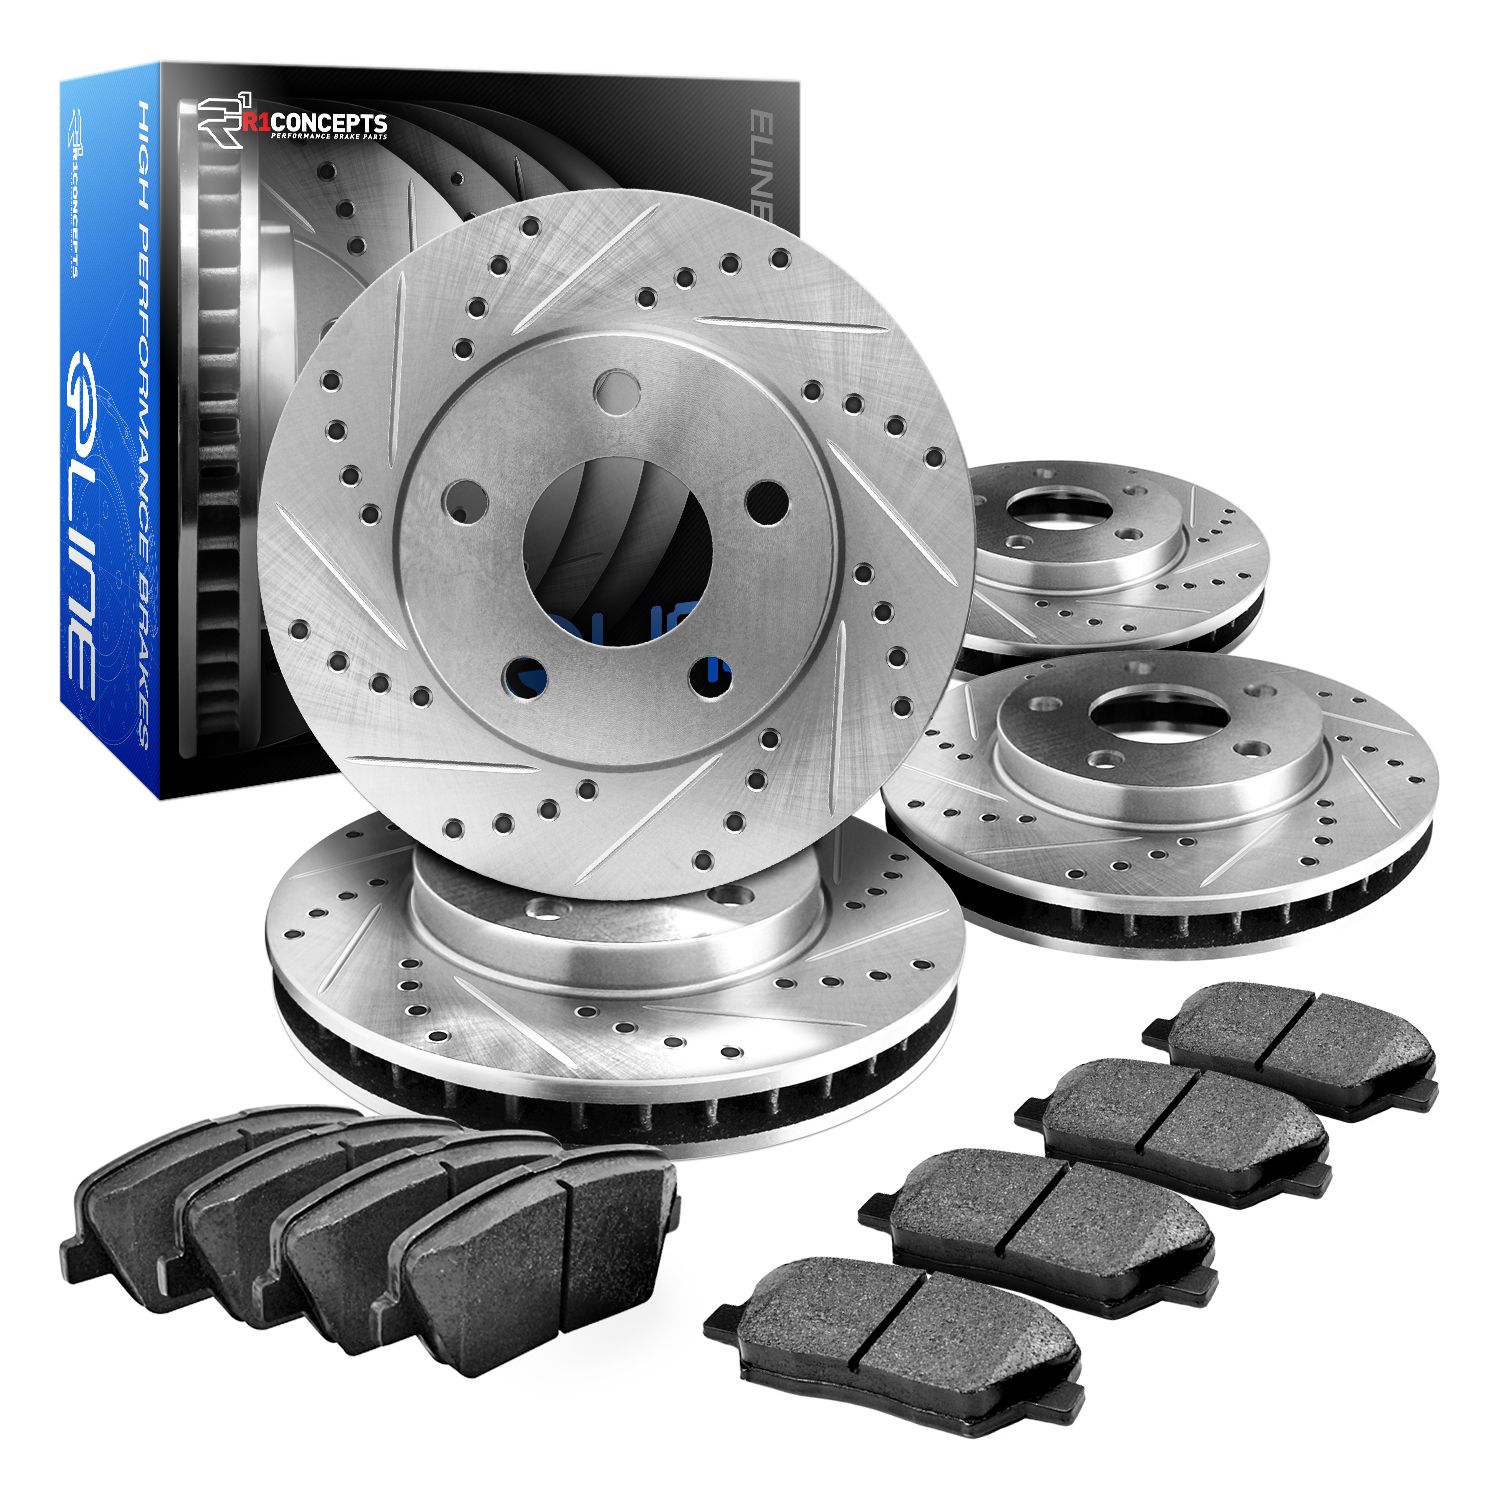 Eline 2009-2013 Chevrolet Silverado 1500 LTZ 6.2L Front And Rear Drilled  Slotted Brake Rotors + Ceramic Pads